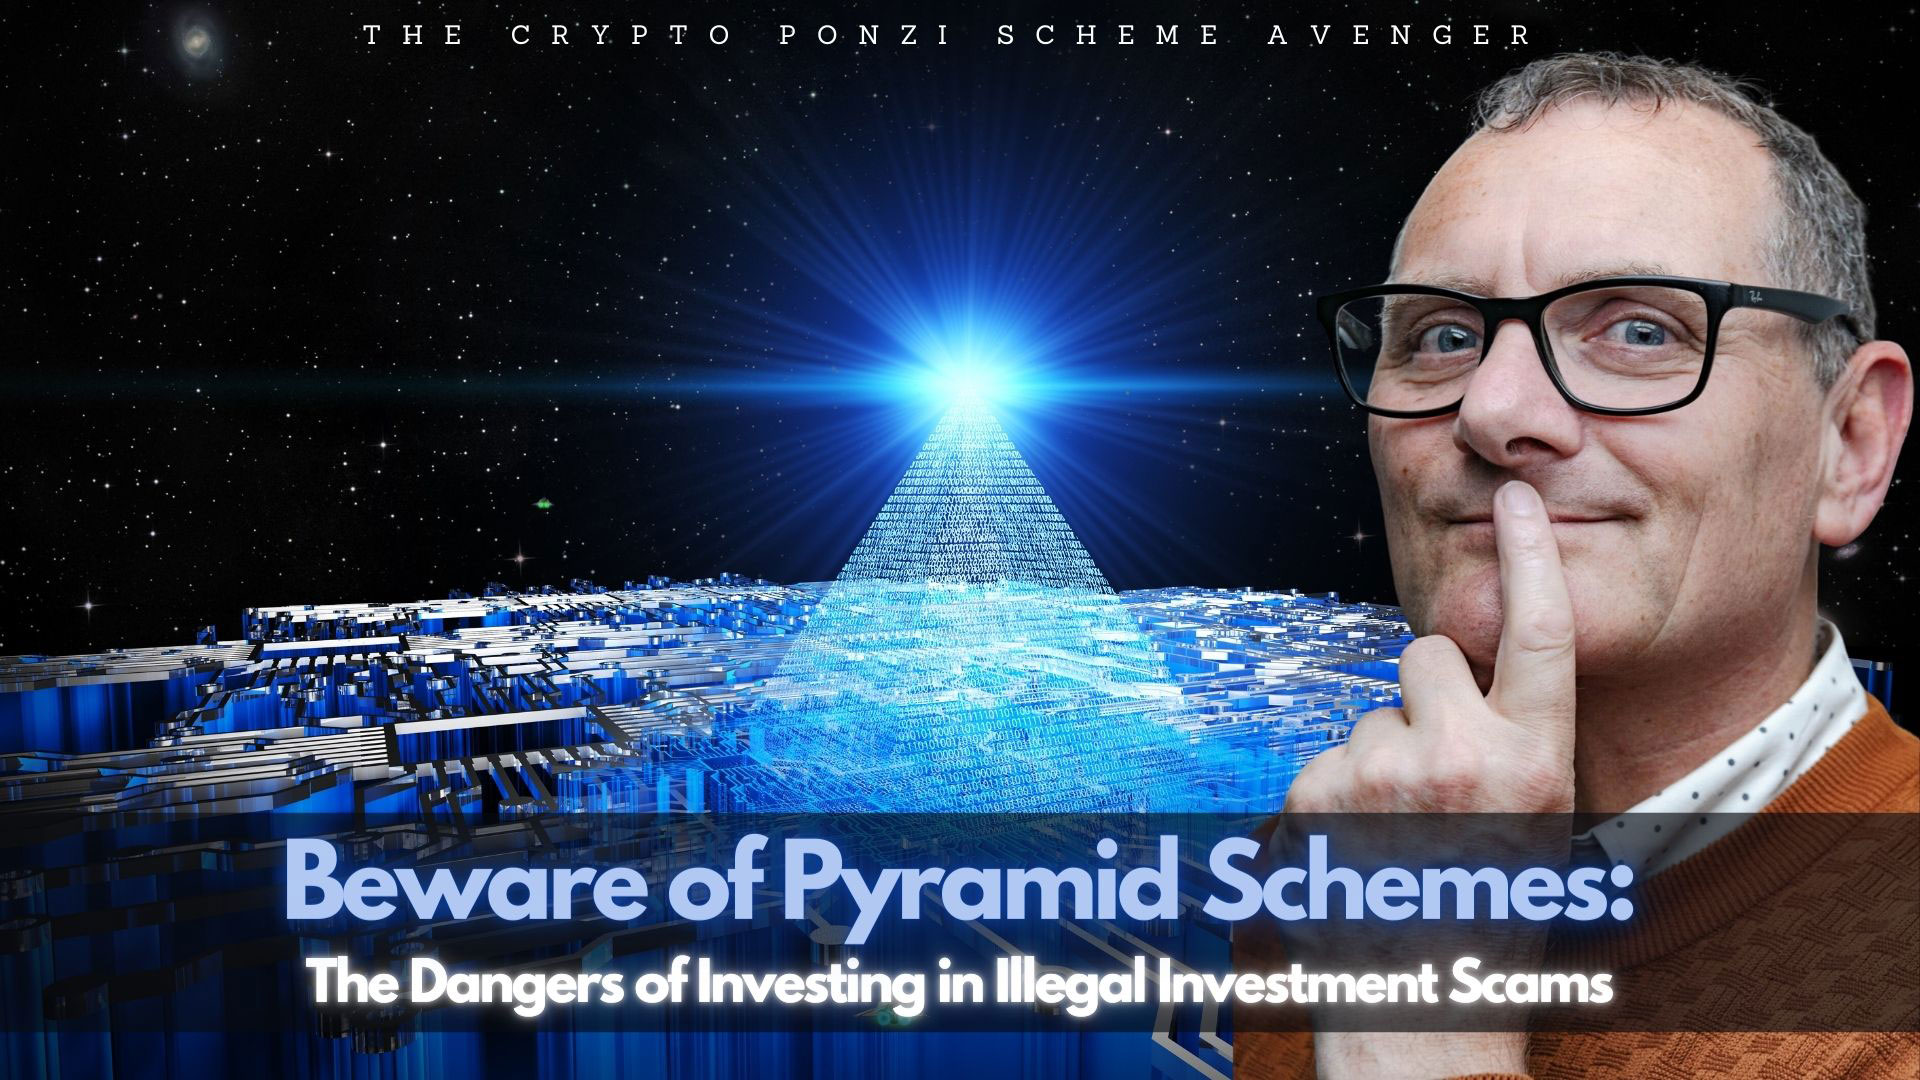 Beware of Pyramid Schemes: The Dangers of Investing in Illegal Investment Scams